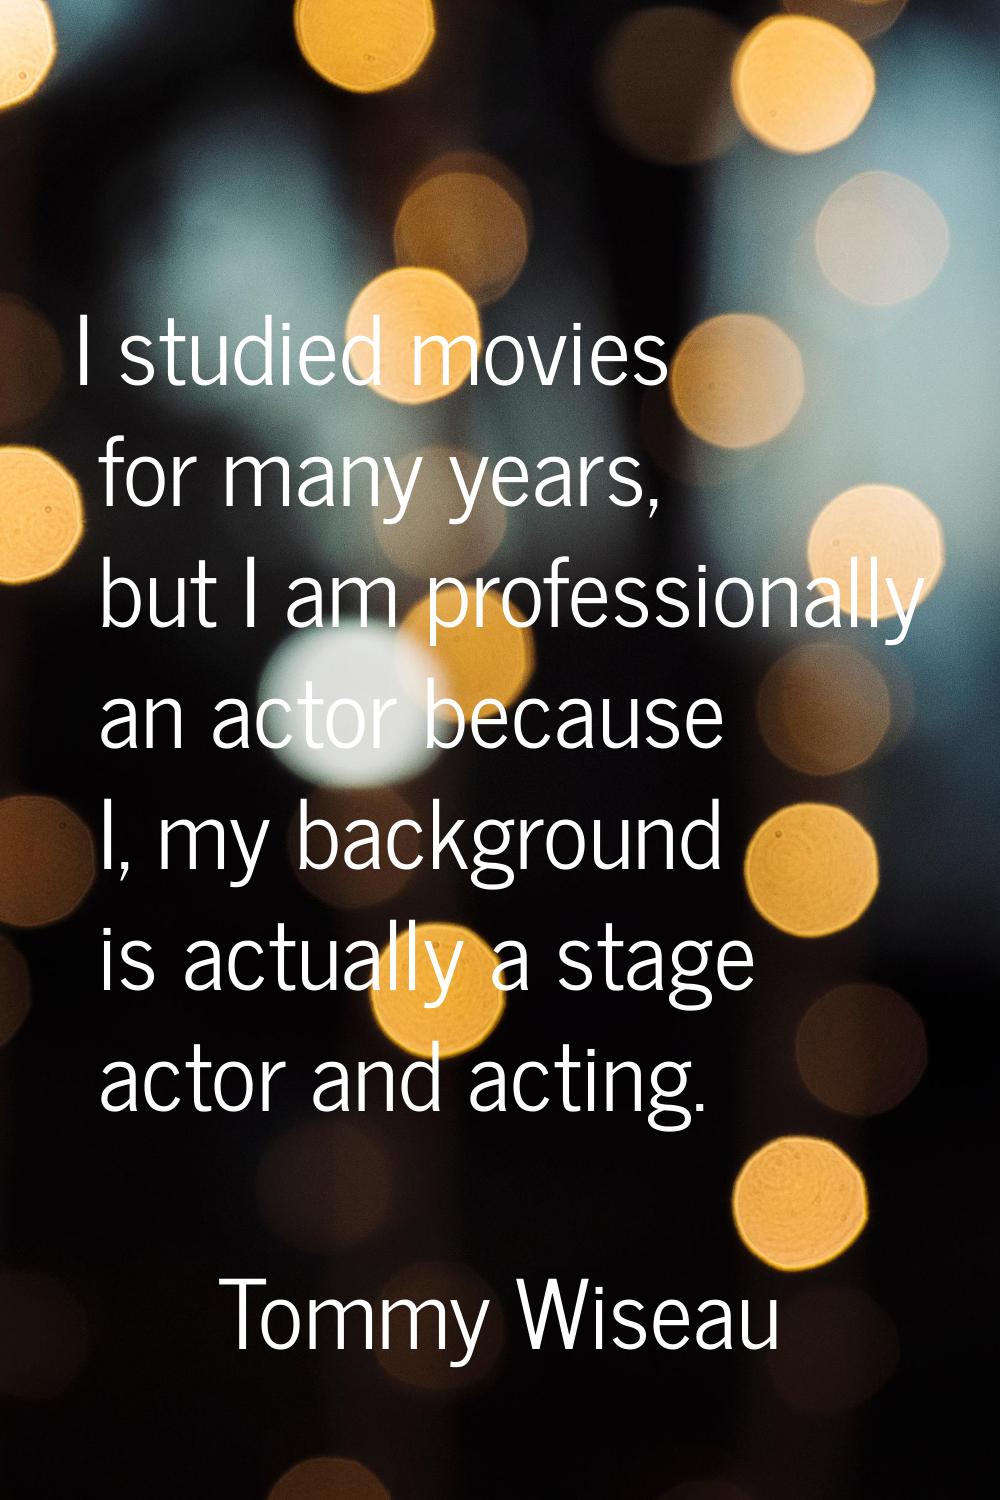 I studied movies for many years, but I am professionally an actor because I, my background is actua